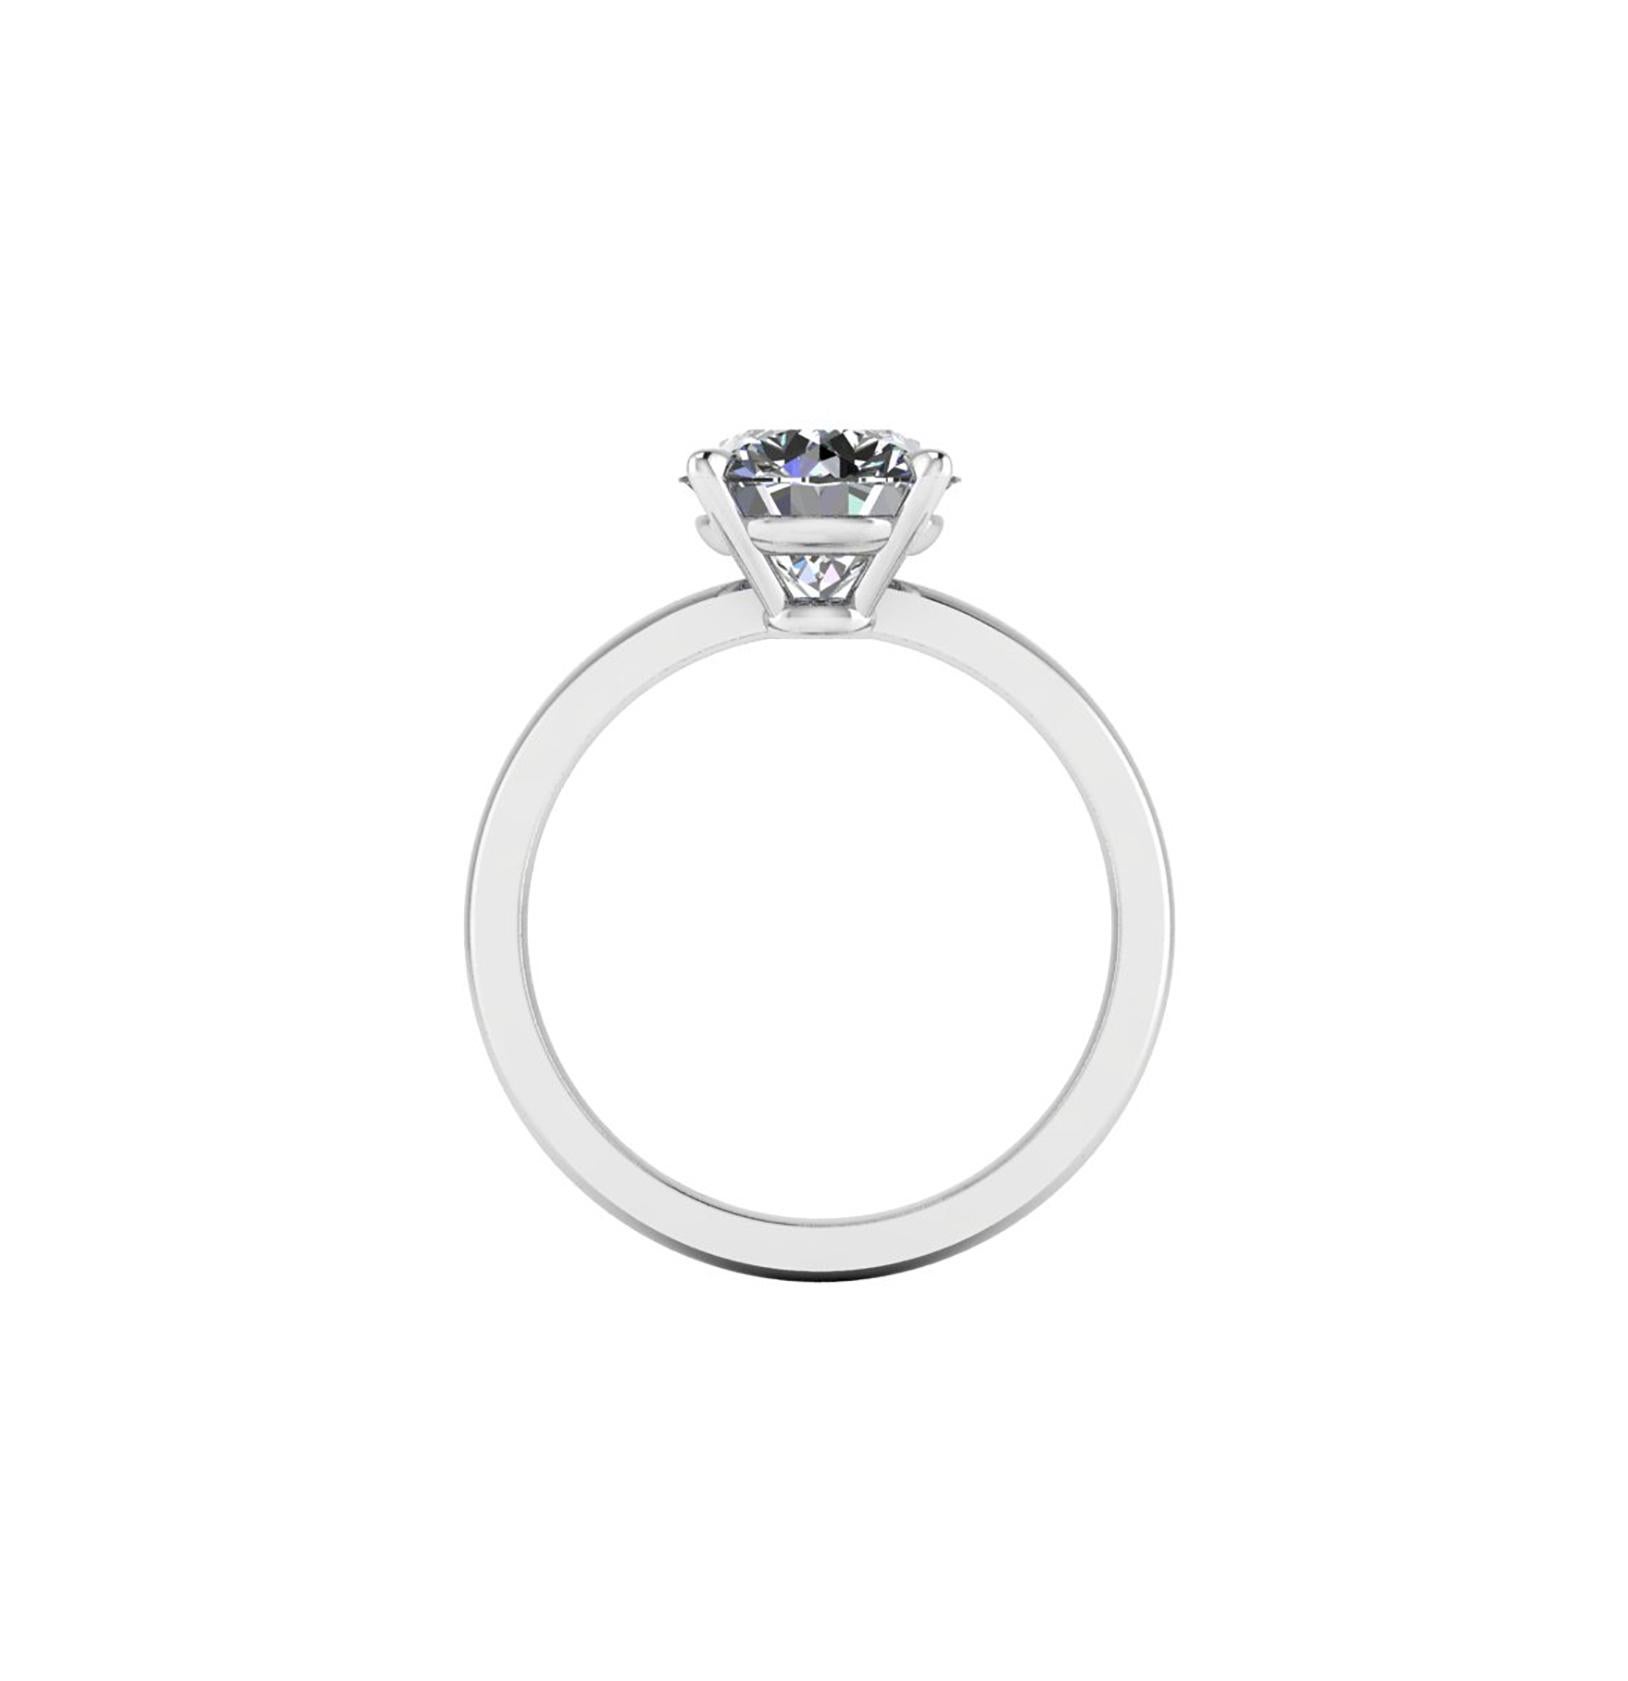 GIA Certified 2.05 Carat white round diamond, color H, clarity VS2, triple Excellent in Cut, Symmetry and Polishing, set in hand made Platinum 950 gold Solitaire engagement ring, made in New York City, a bold message of simplicity in design in favor